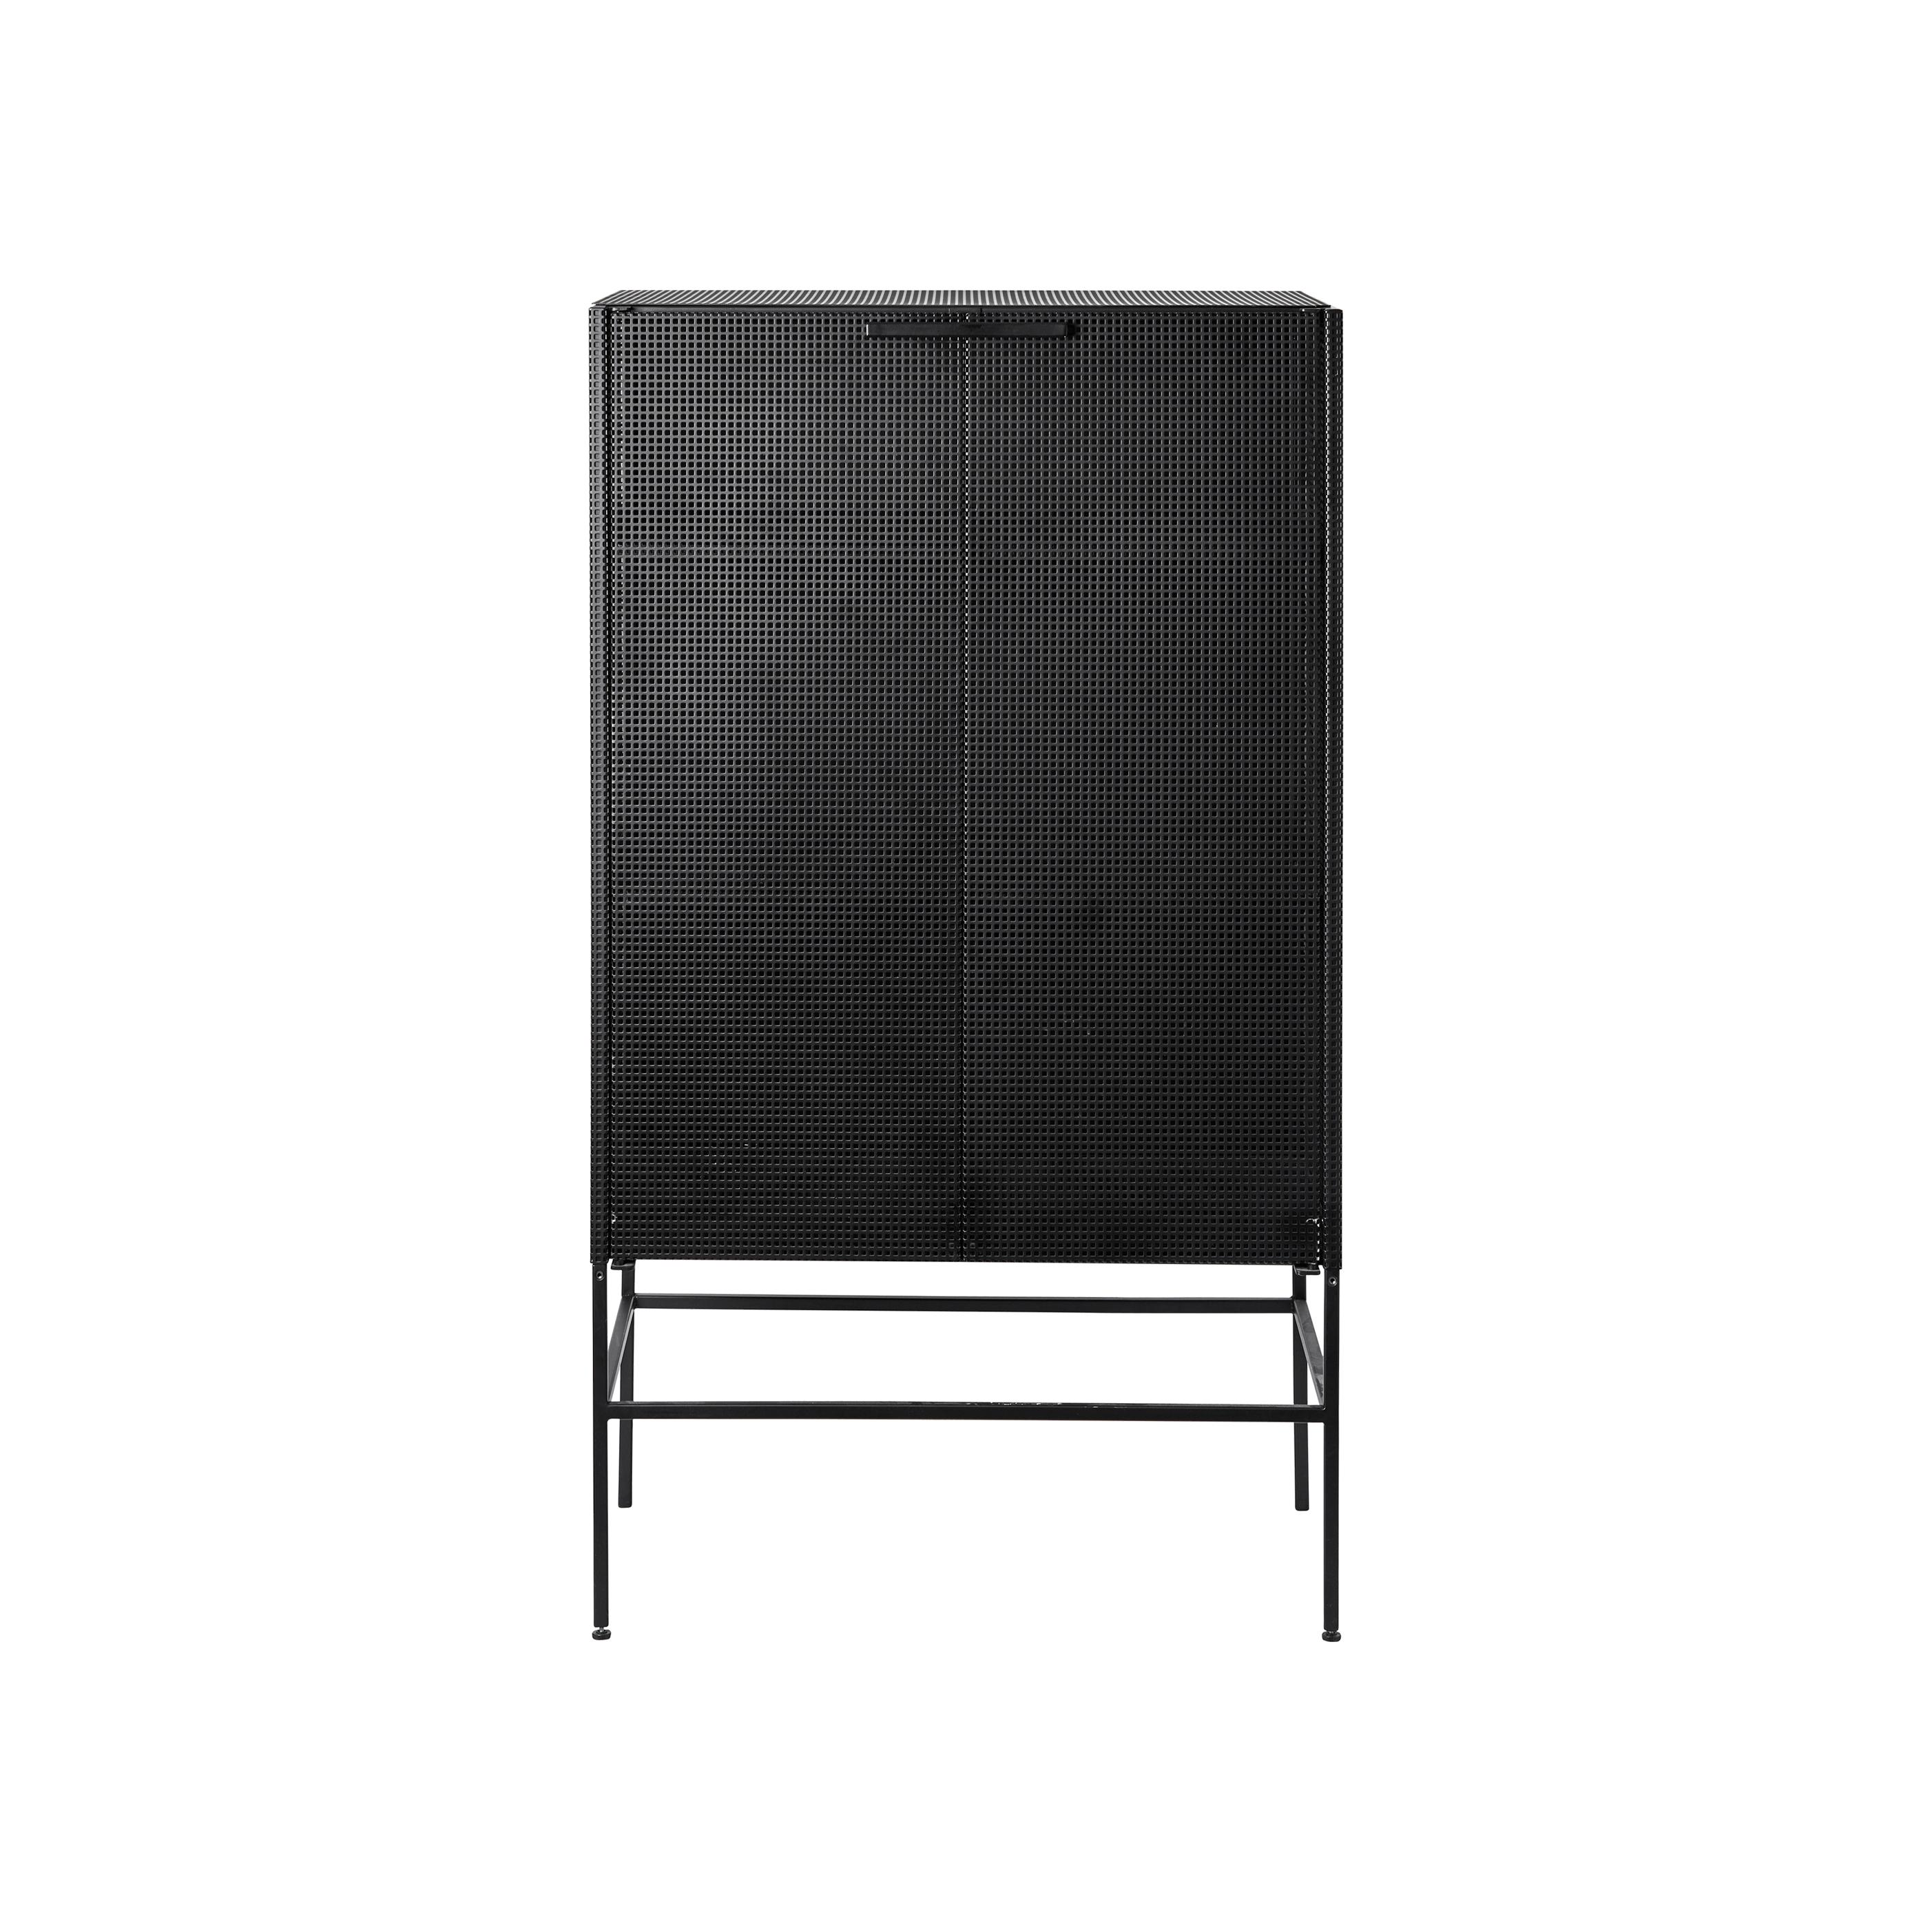 Black grid cabinet by Kristina Dam Studio
Materials: Black outdoor powder-coated steel
Dimensions: 76 x 45 x 131 cm

Dimensions cannot be customized.

Kristina Dam graduated from The Royal Danish School of Fine Arts, architecture and design in